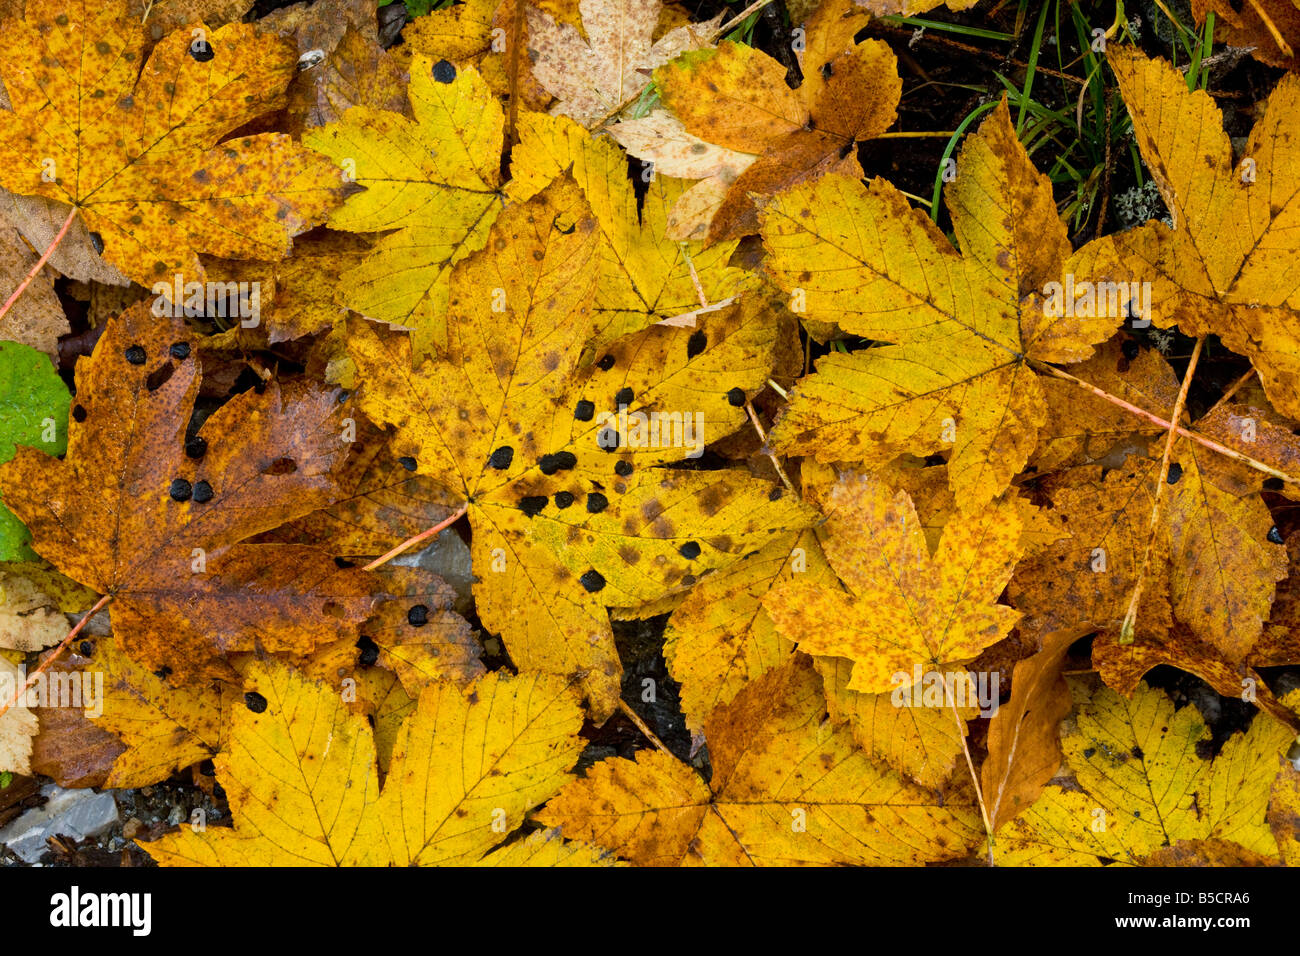 Fallen leaves of Sycamore Acer pseudoplatanus in autumn some with tar spot fungus Romania Stock Photo